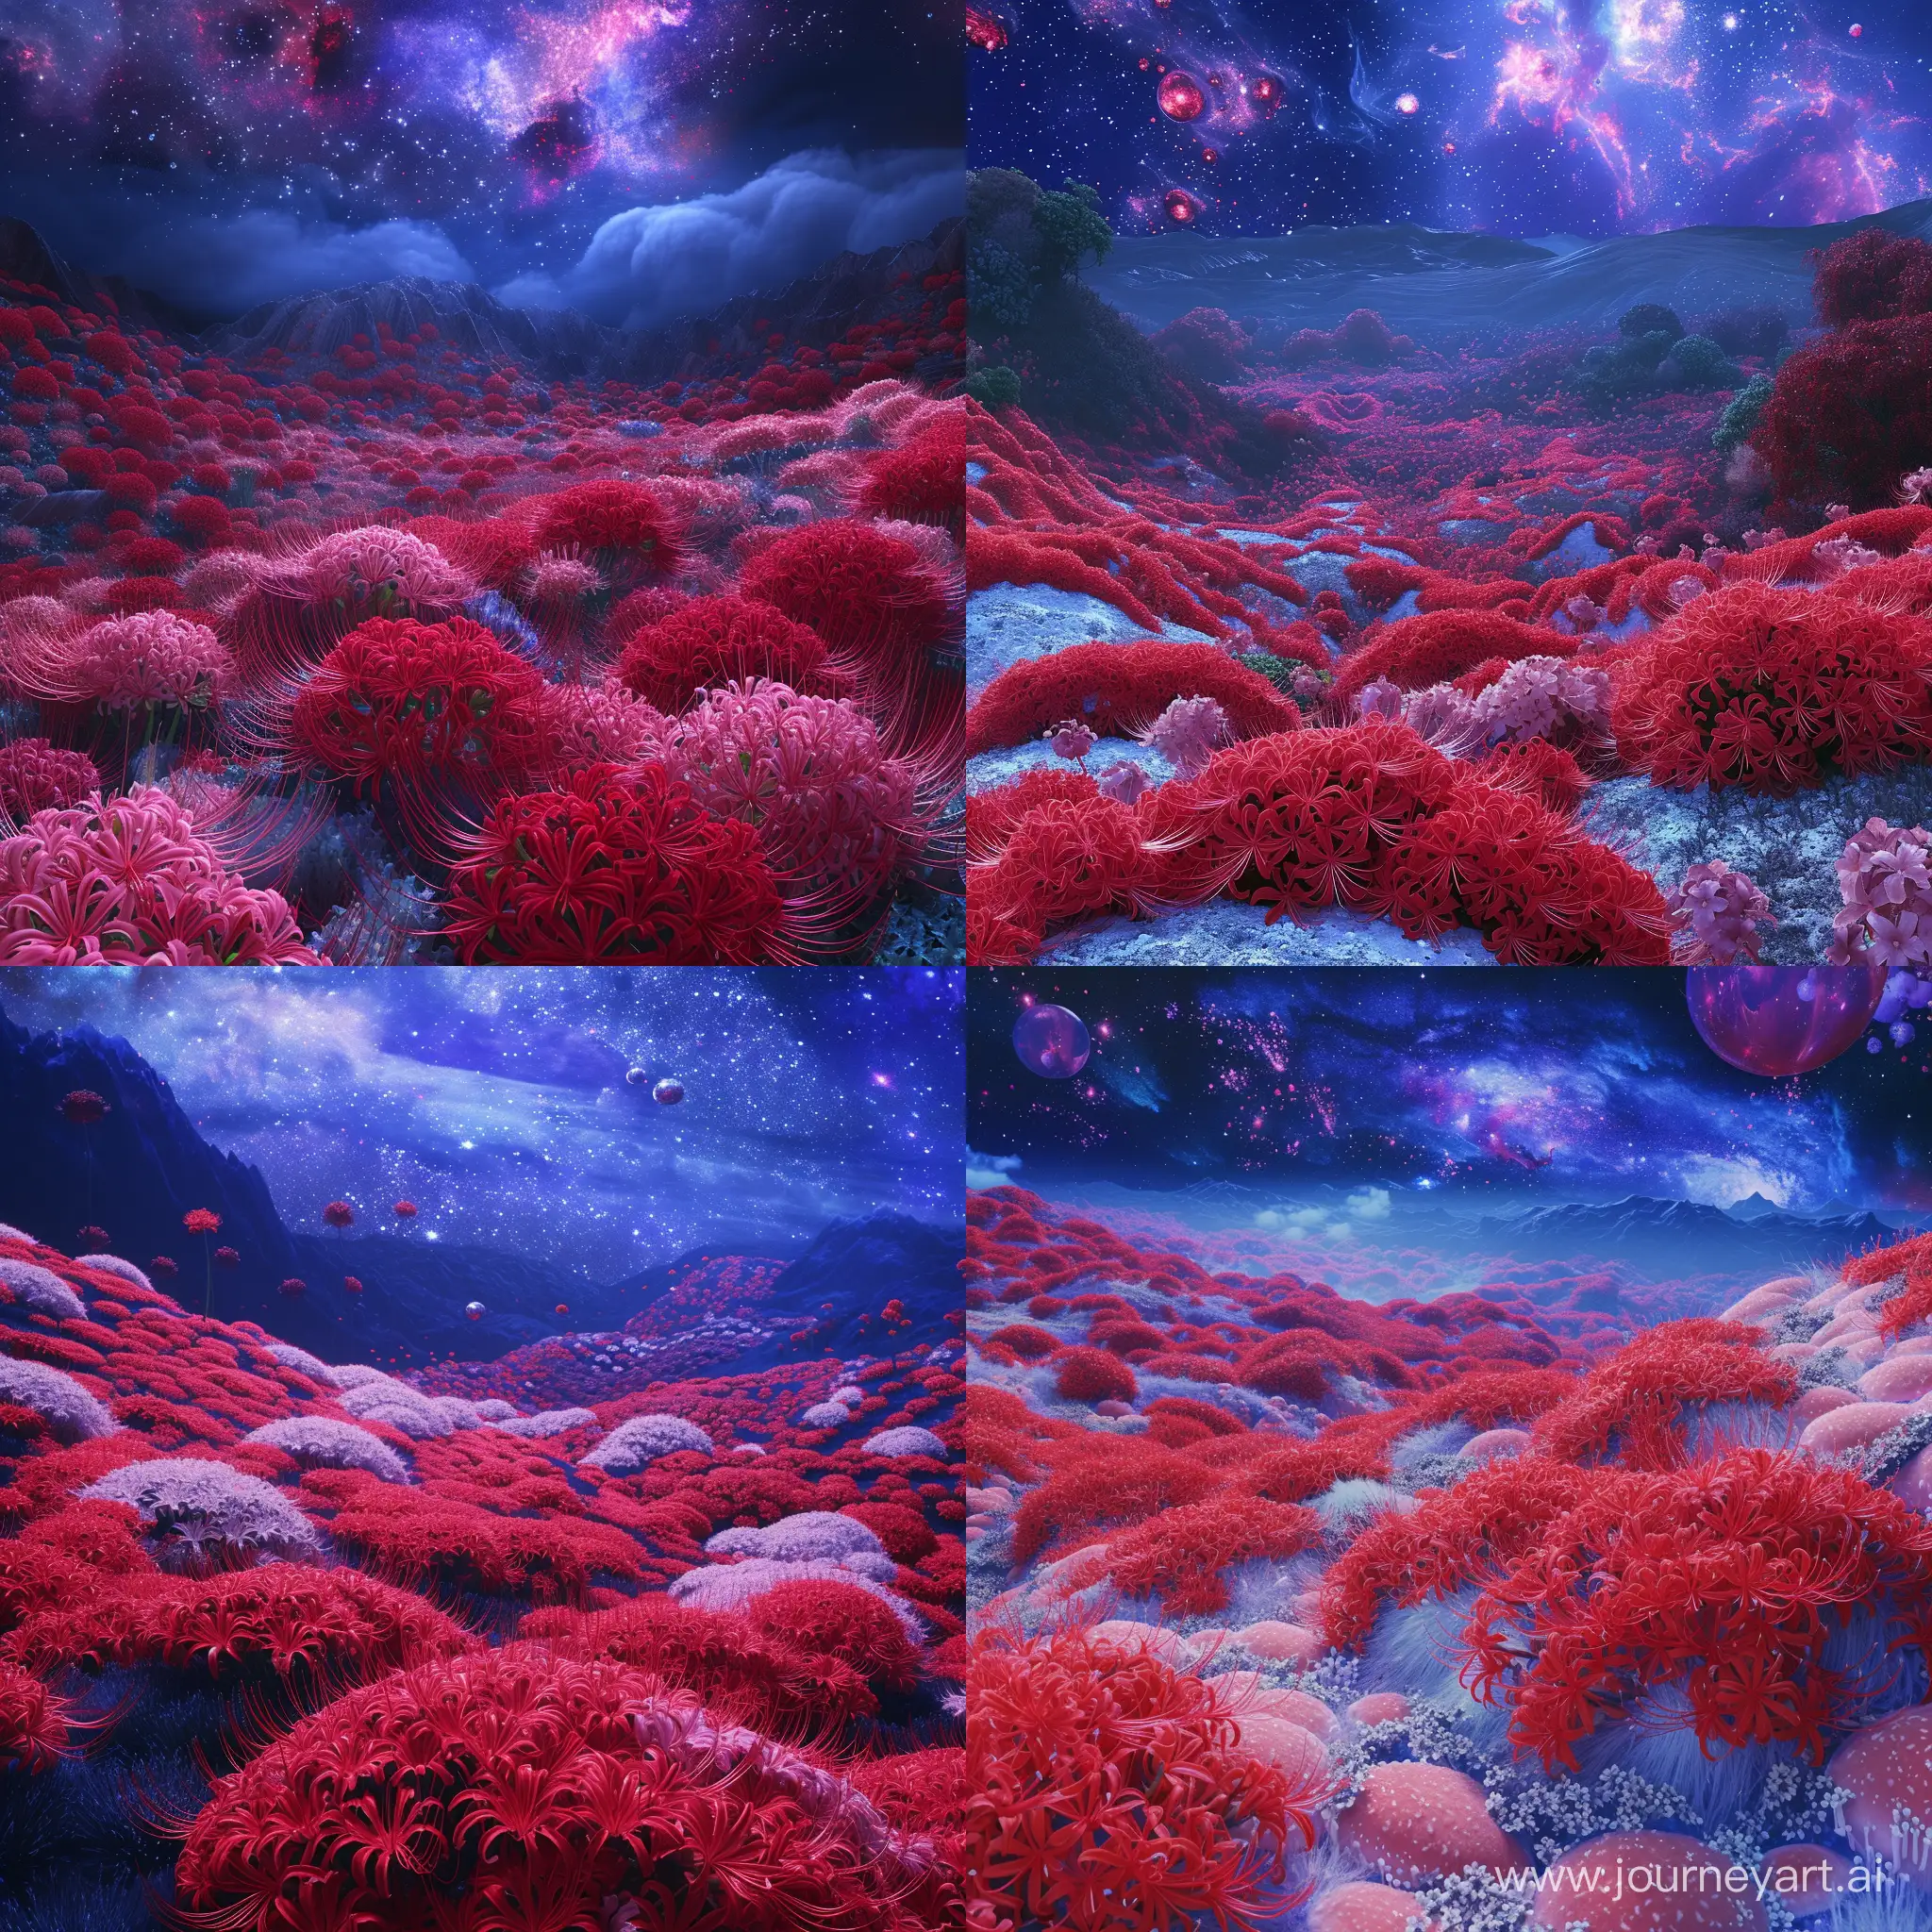 Ethereal-Garden-of-Lycoris-Radiata-Surreal-Red-Blossoms-and-Cosmic-Serenity